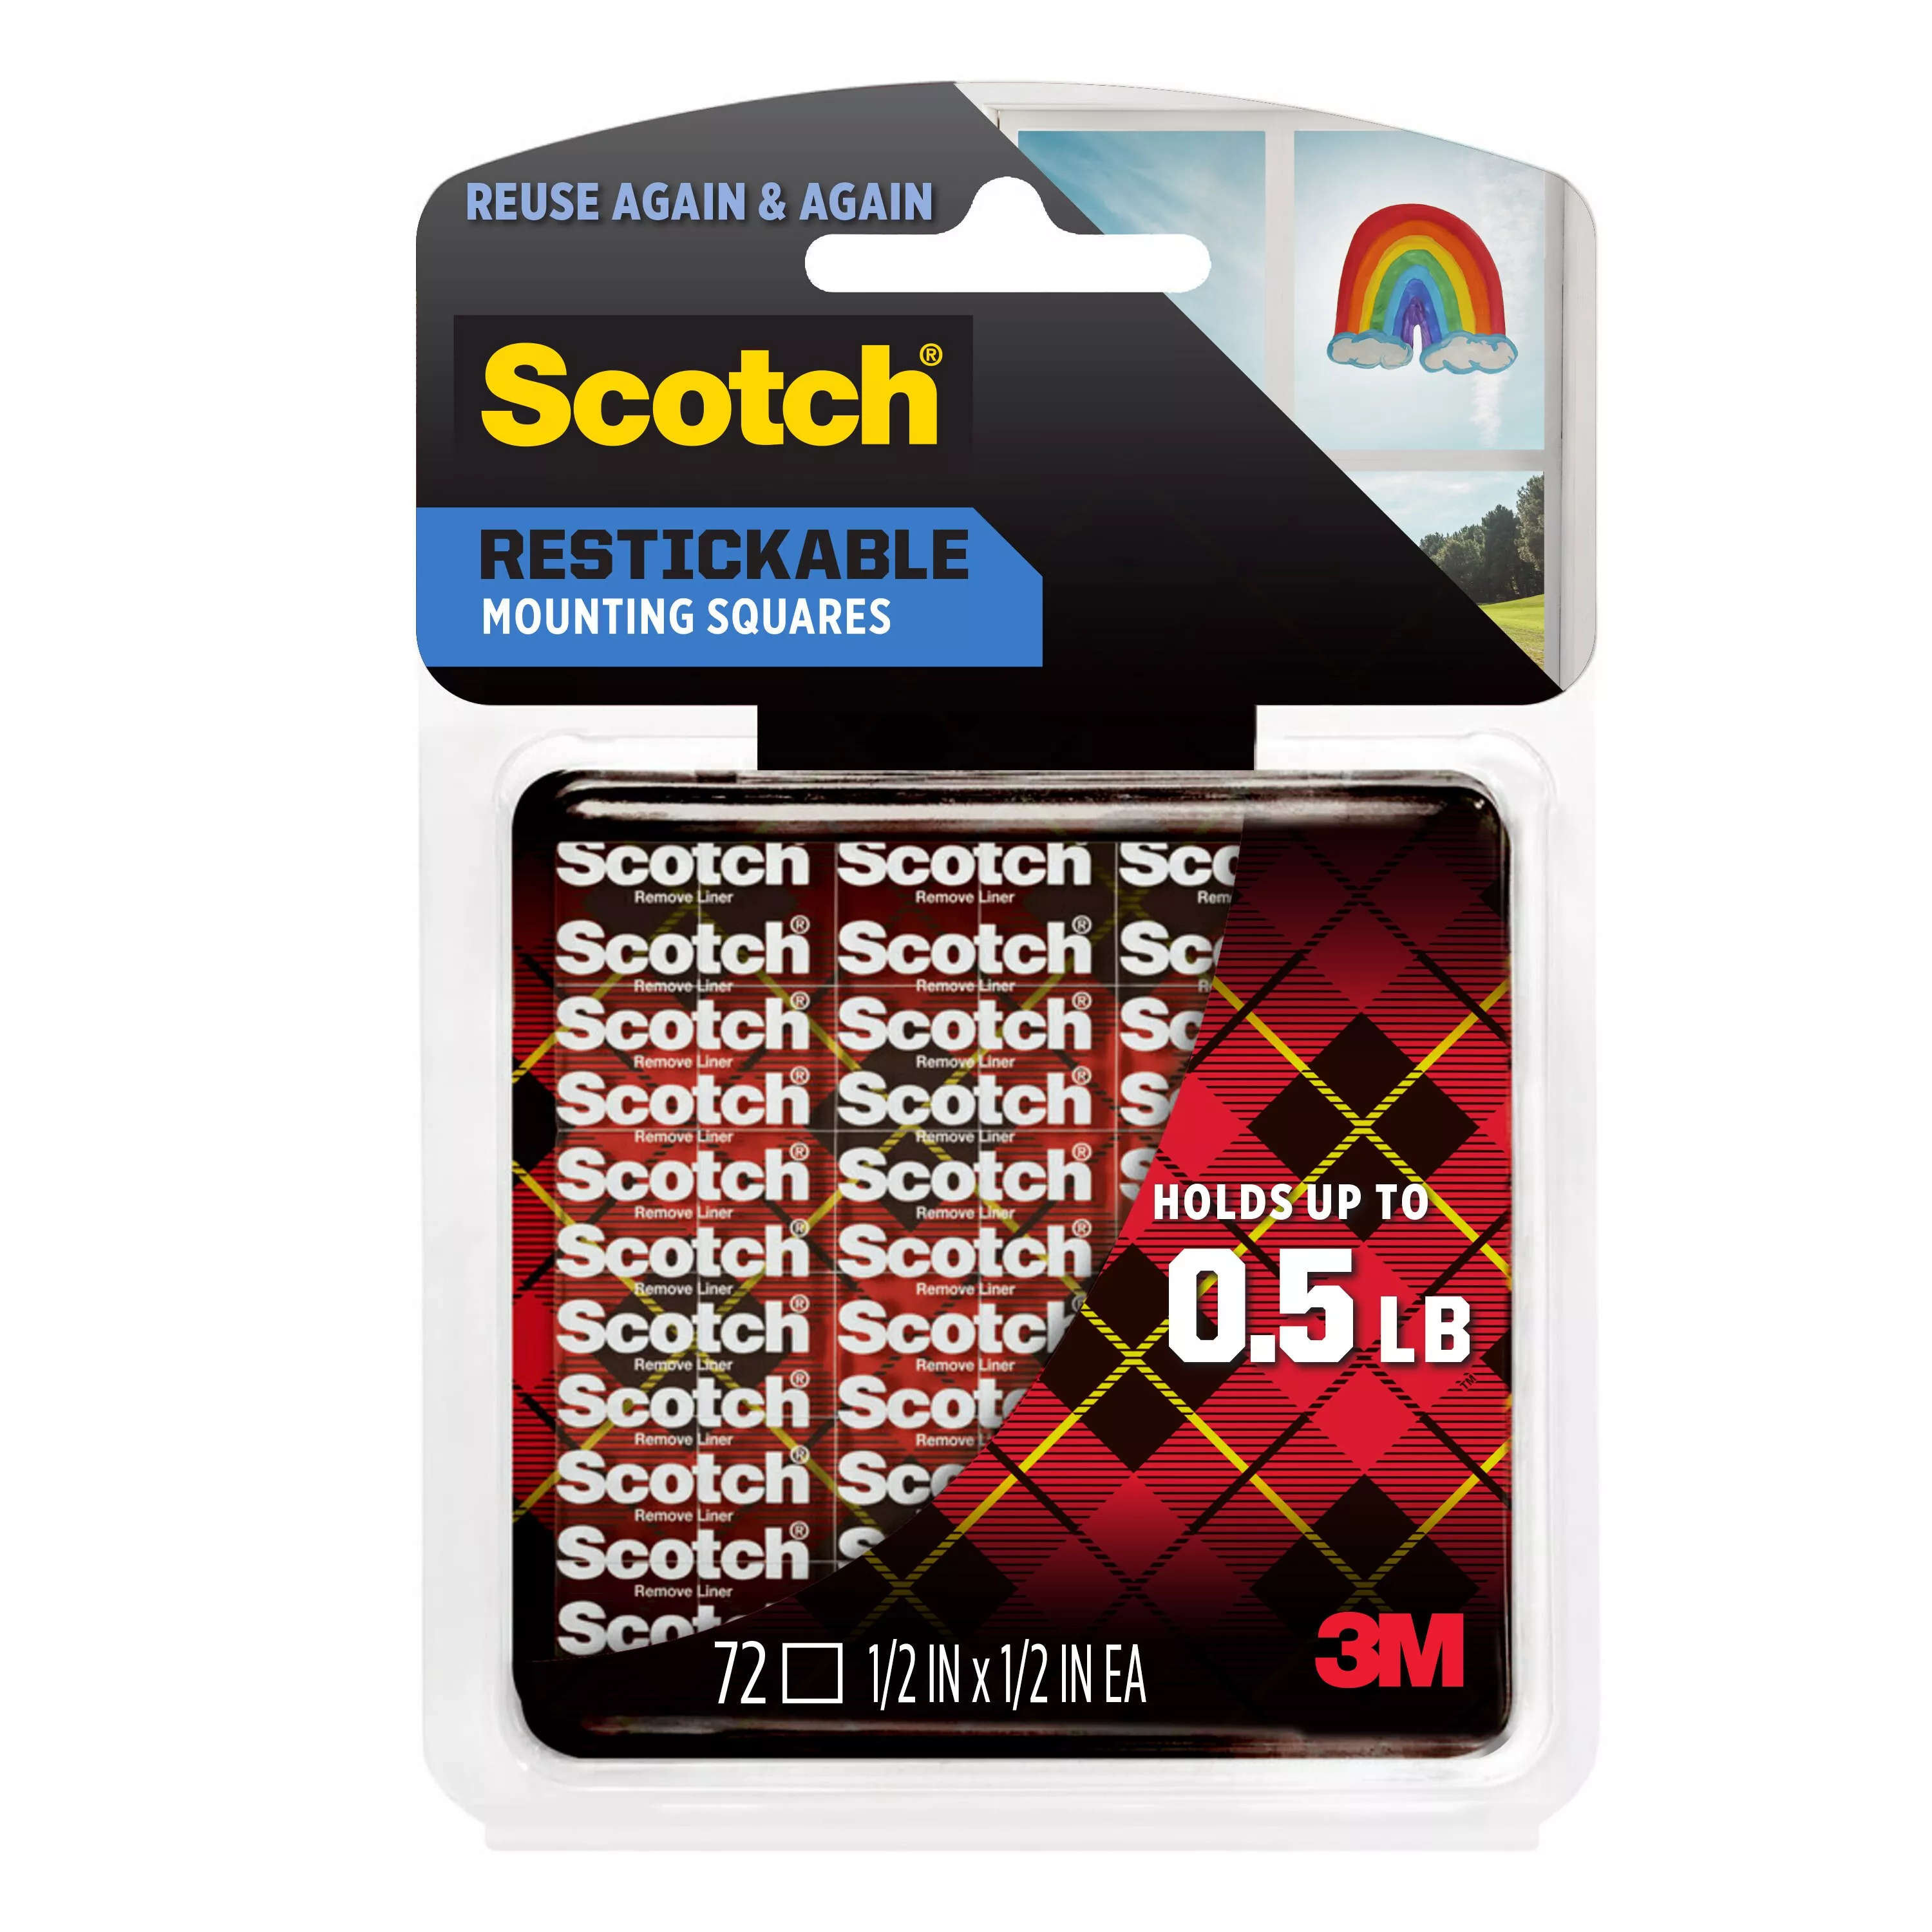 Scotch® Restickable Mounting Squares R103S, 1/2 in x 1/2 in (1.27 cm x 1.27 cm) 72/pk